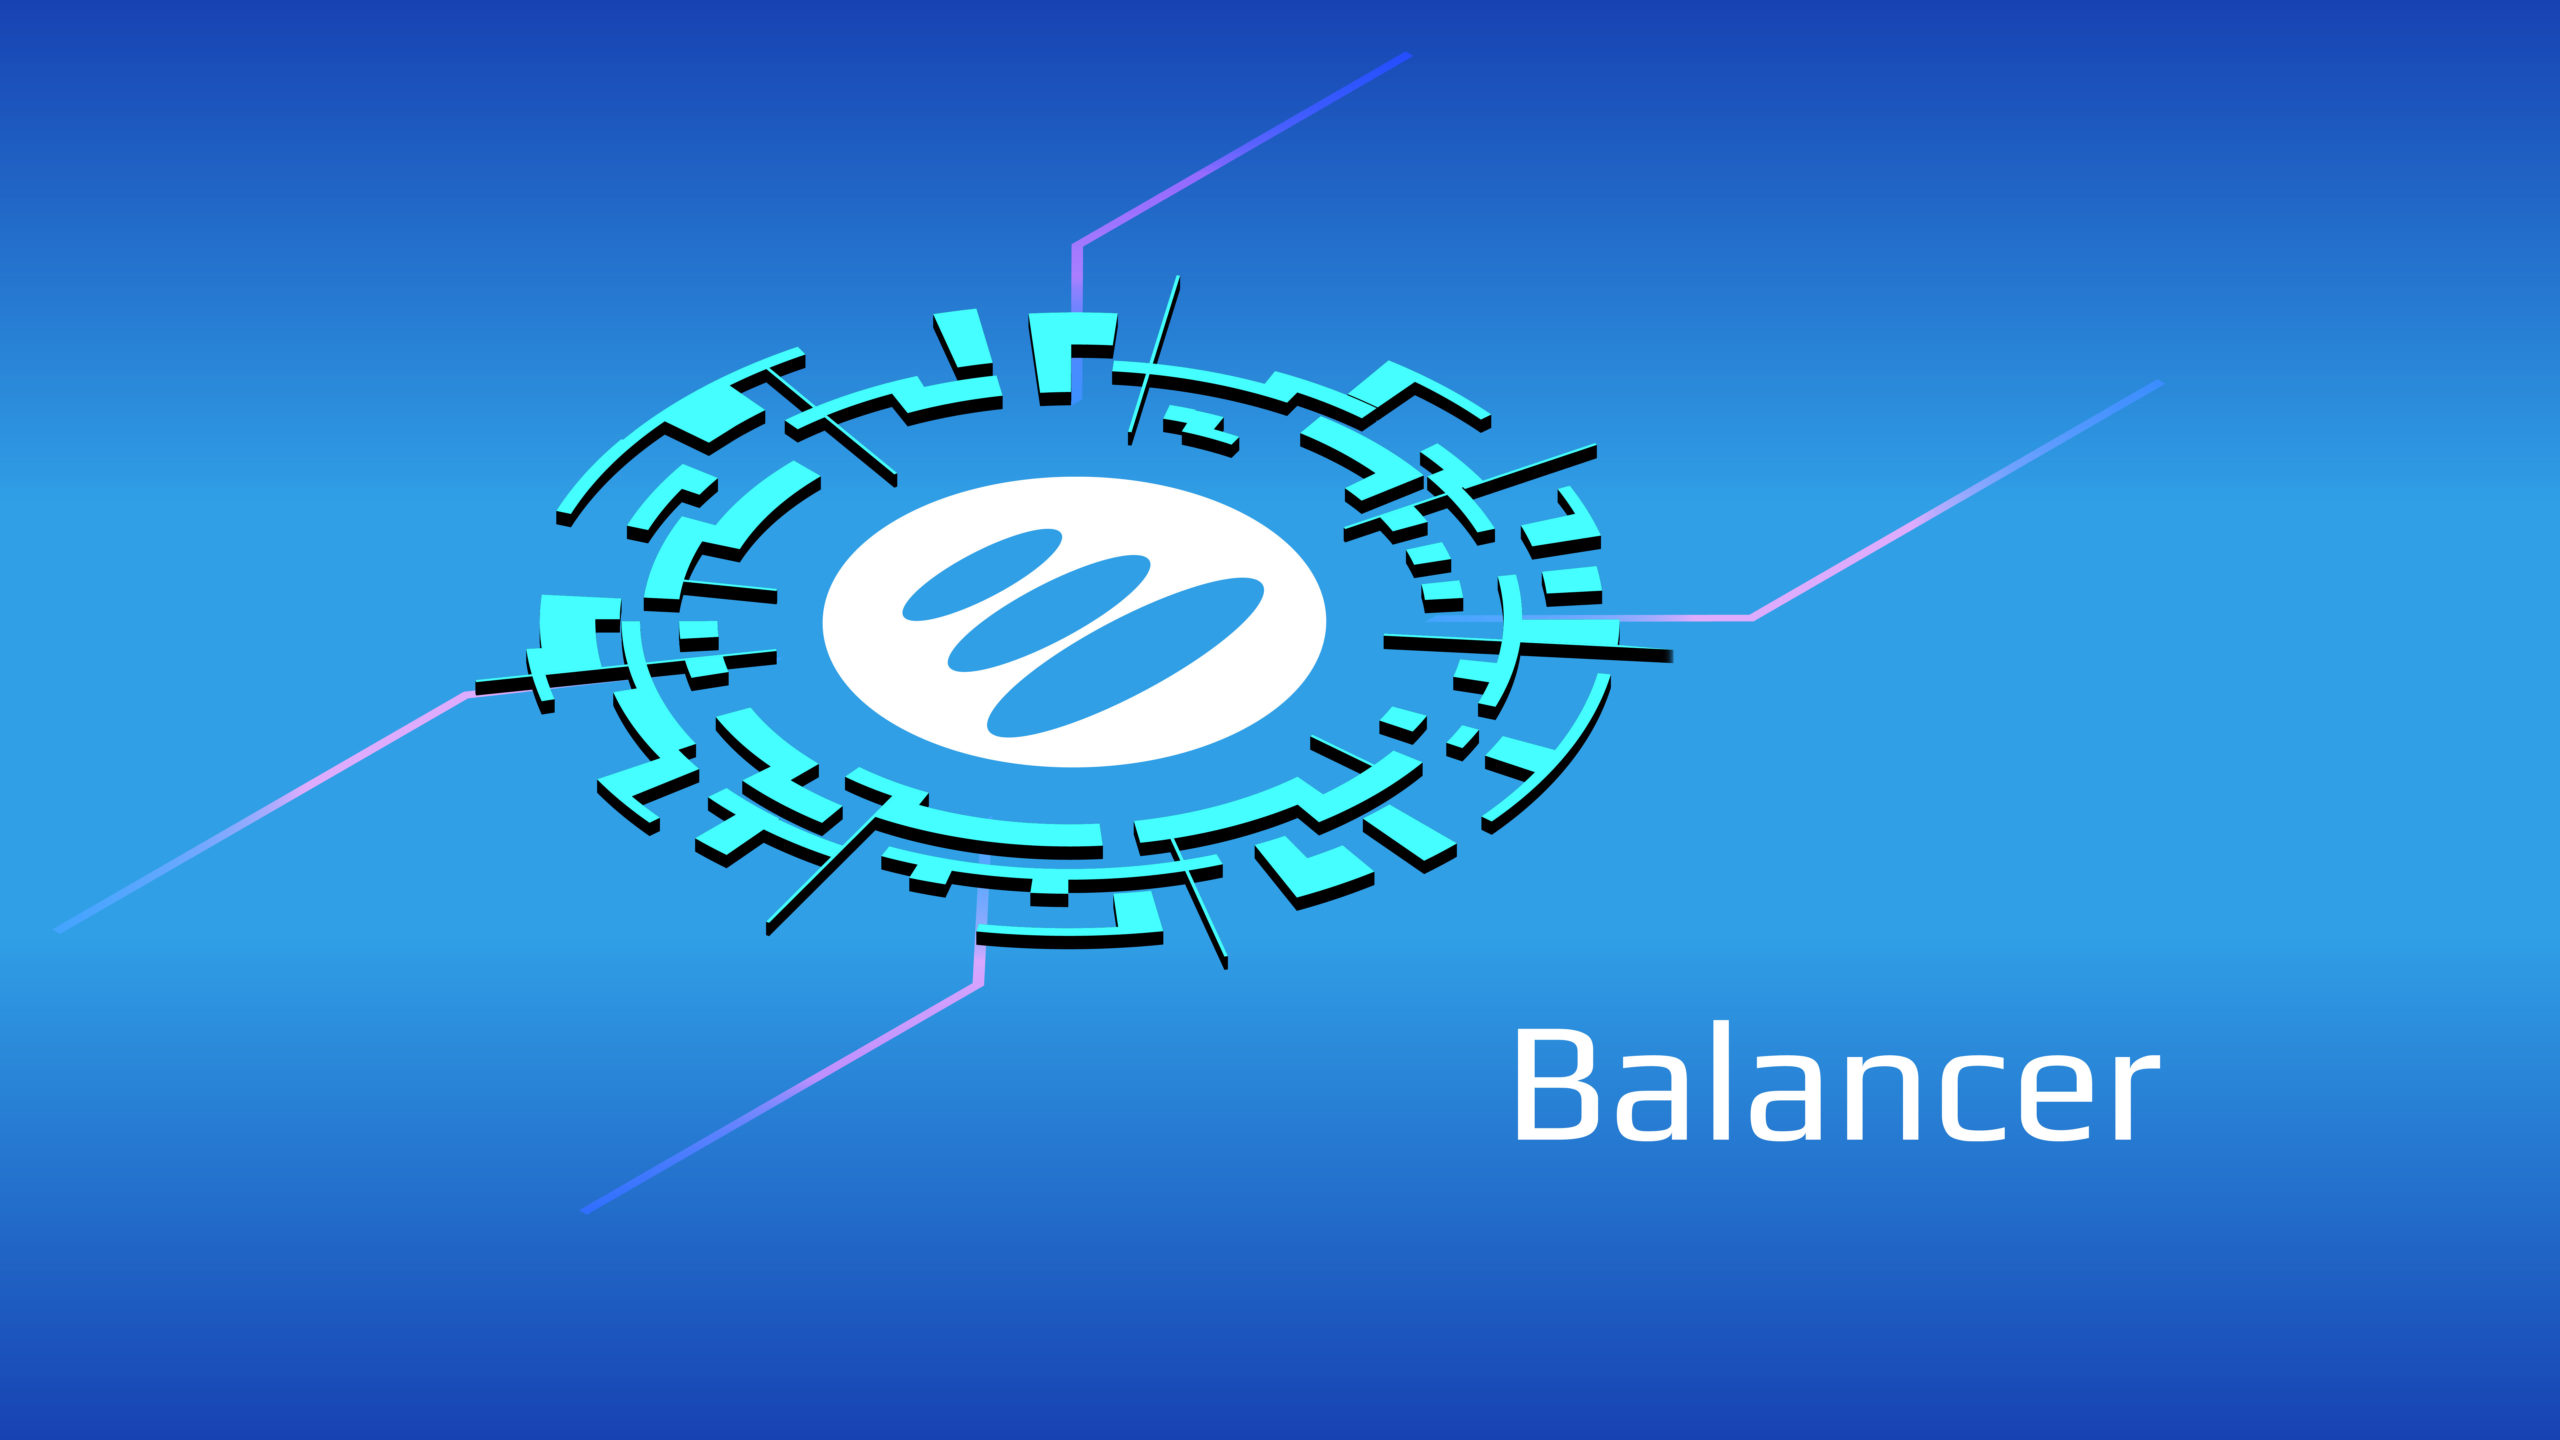 DeFi Protocol Balancer has integrated With the WallStreetBets cryptocurrency app, should you invest in BAL? | Invezz